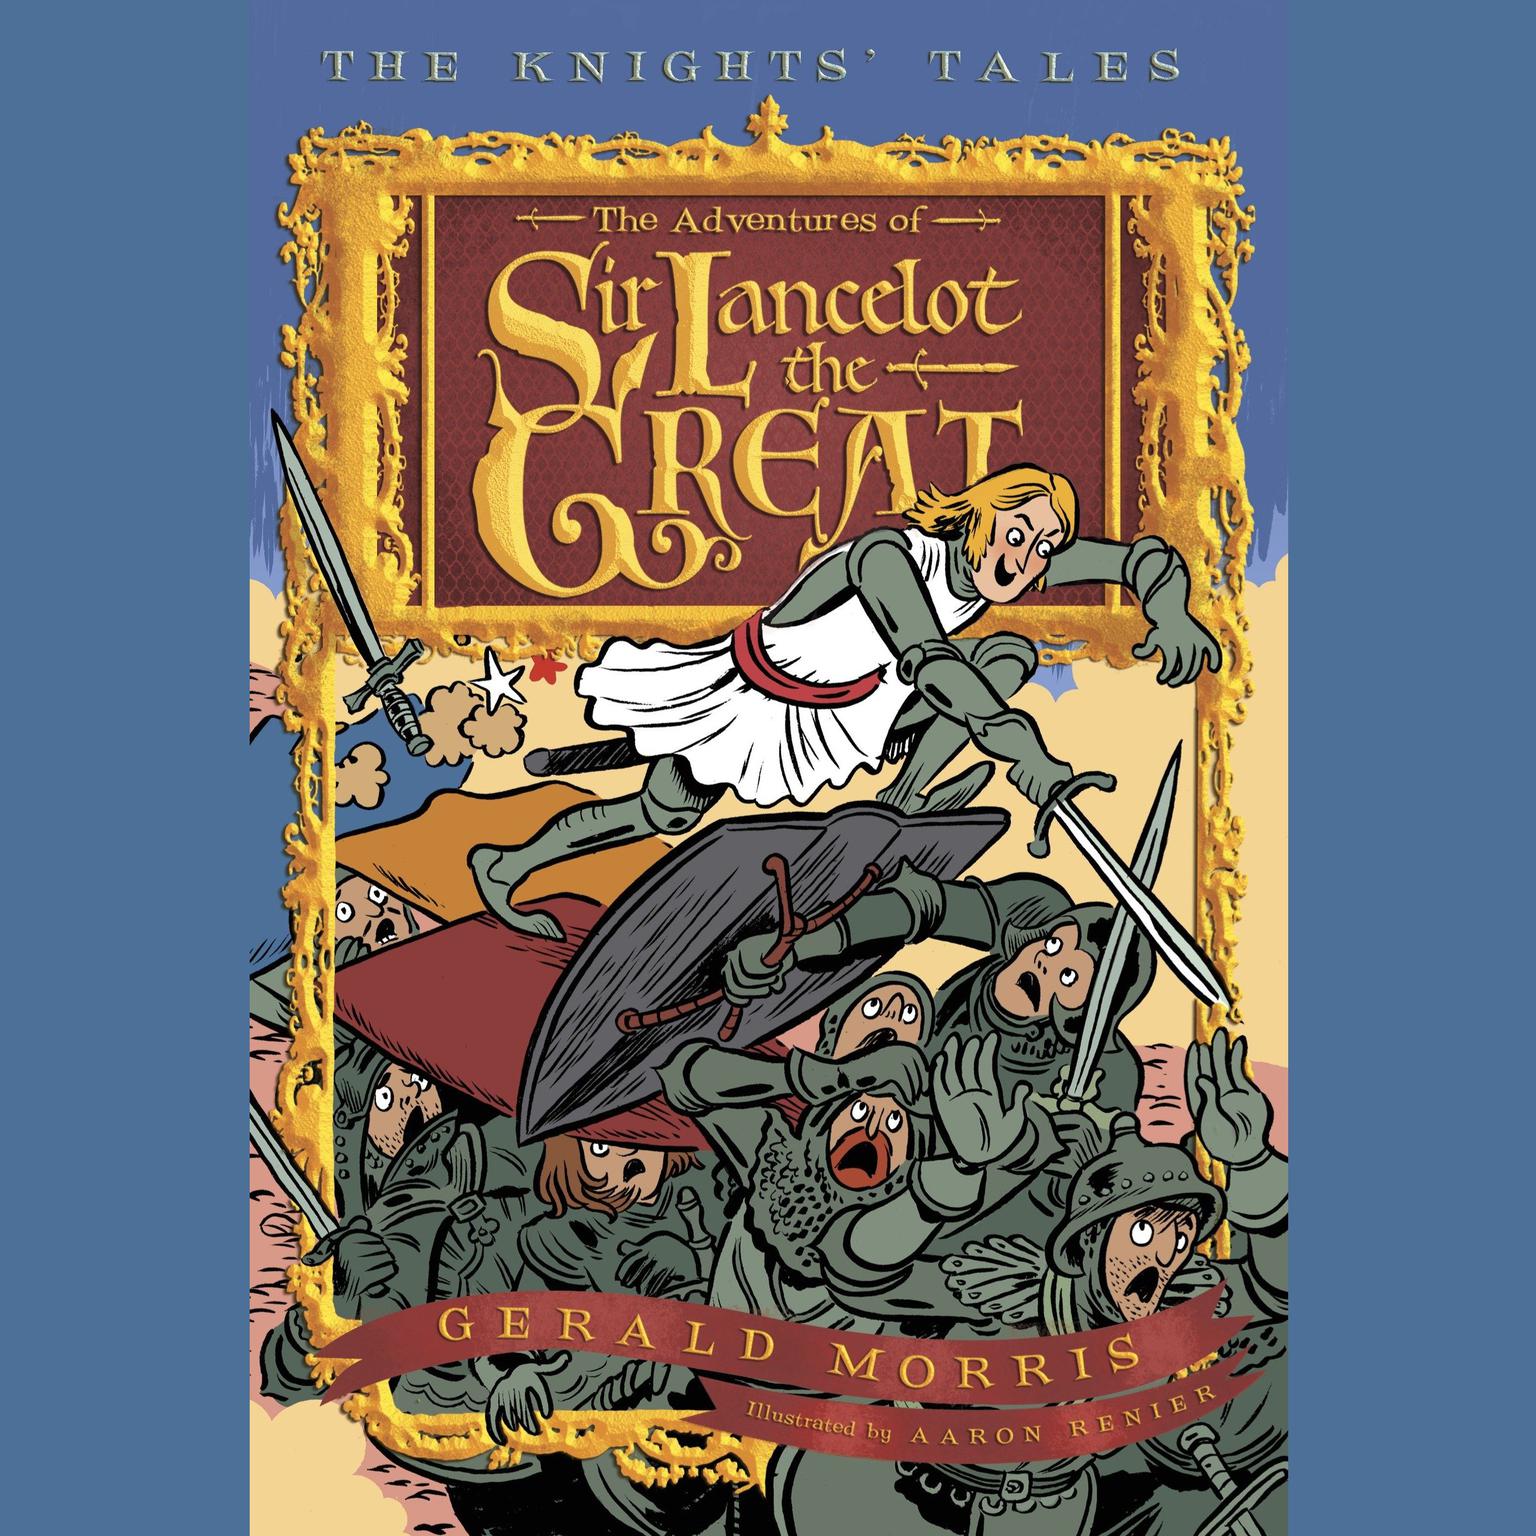 The Adventures of Sir Lancelot the Great: The Knights Tales Book 1 Audiobook, by Gerald Morris